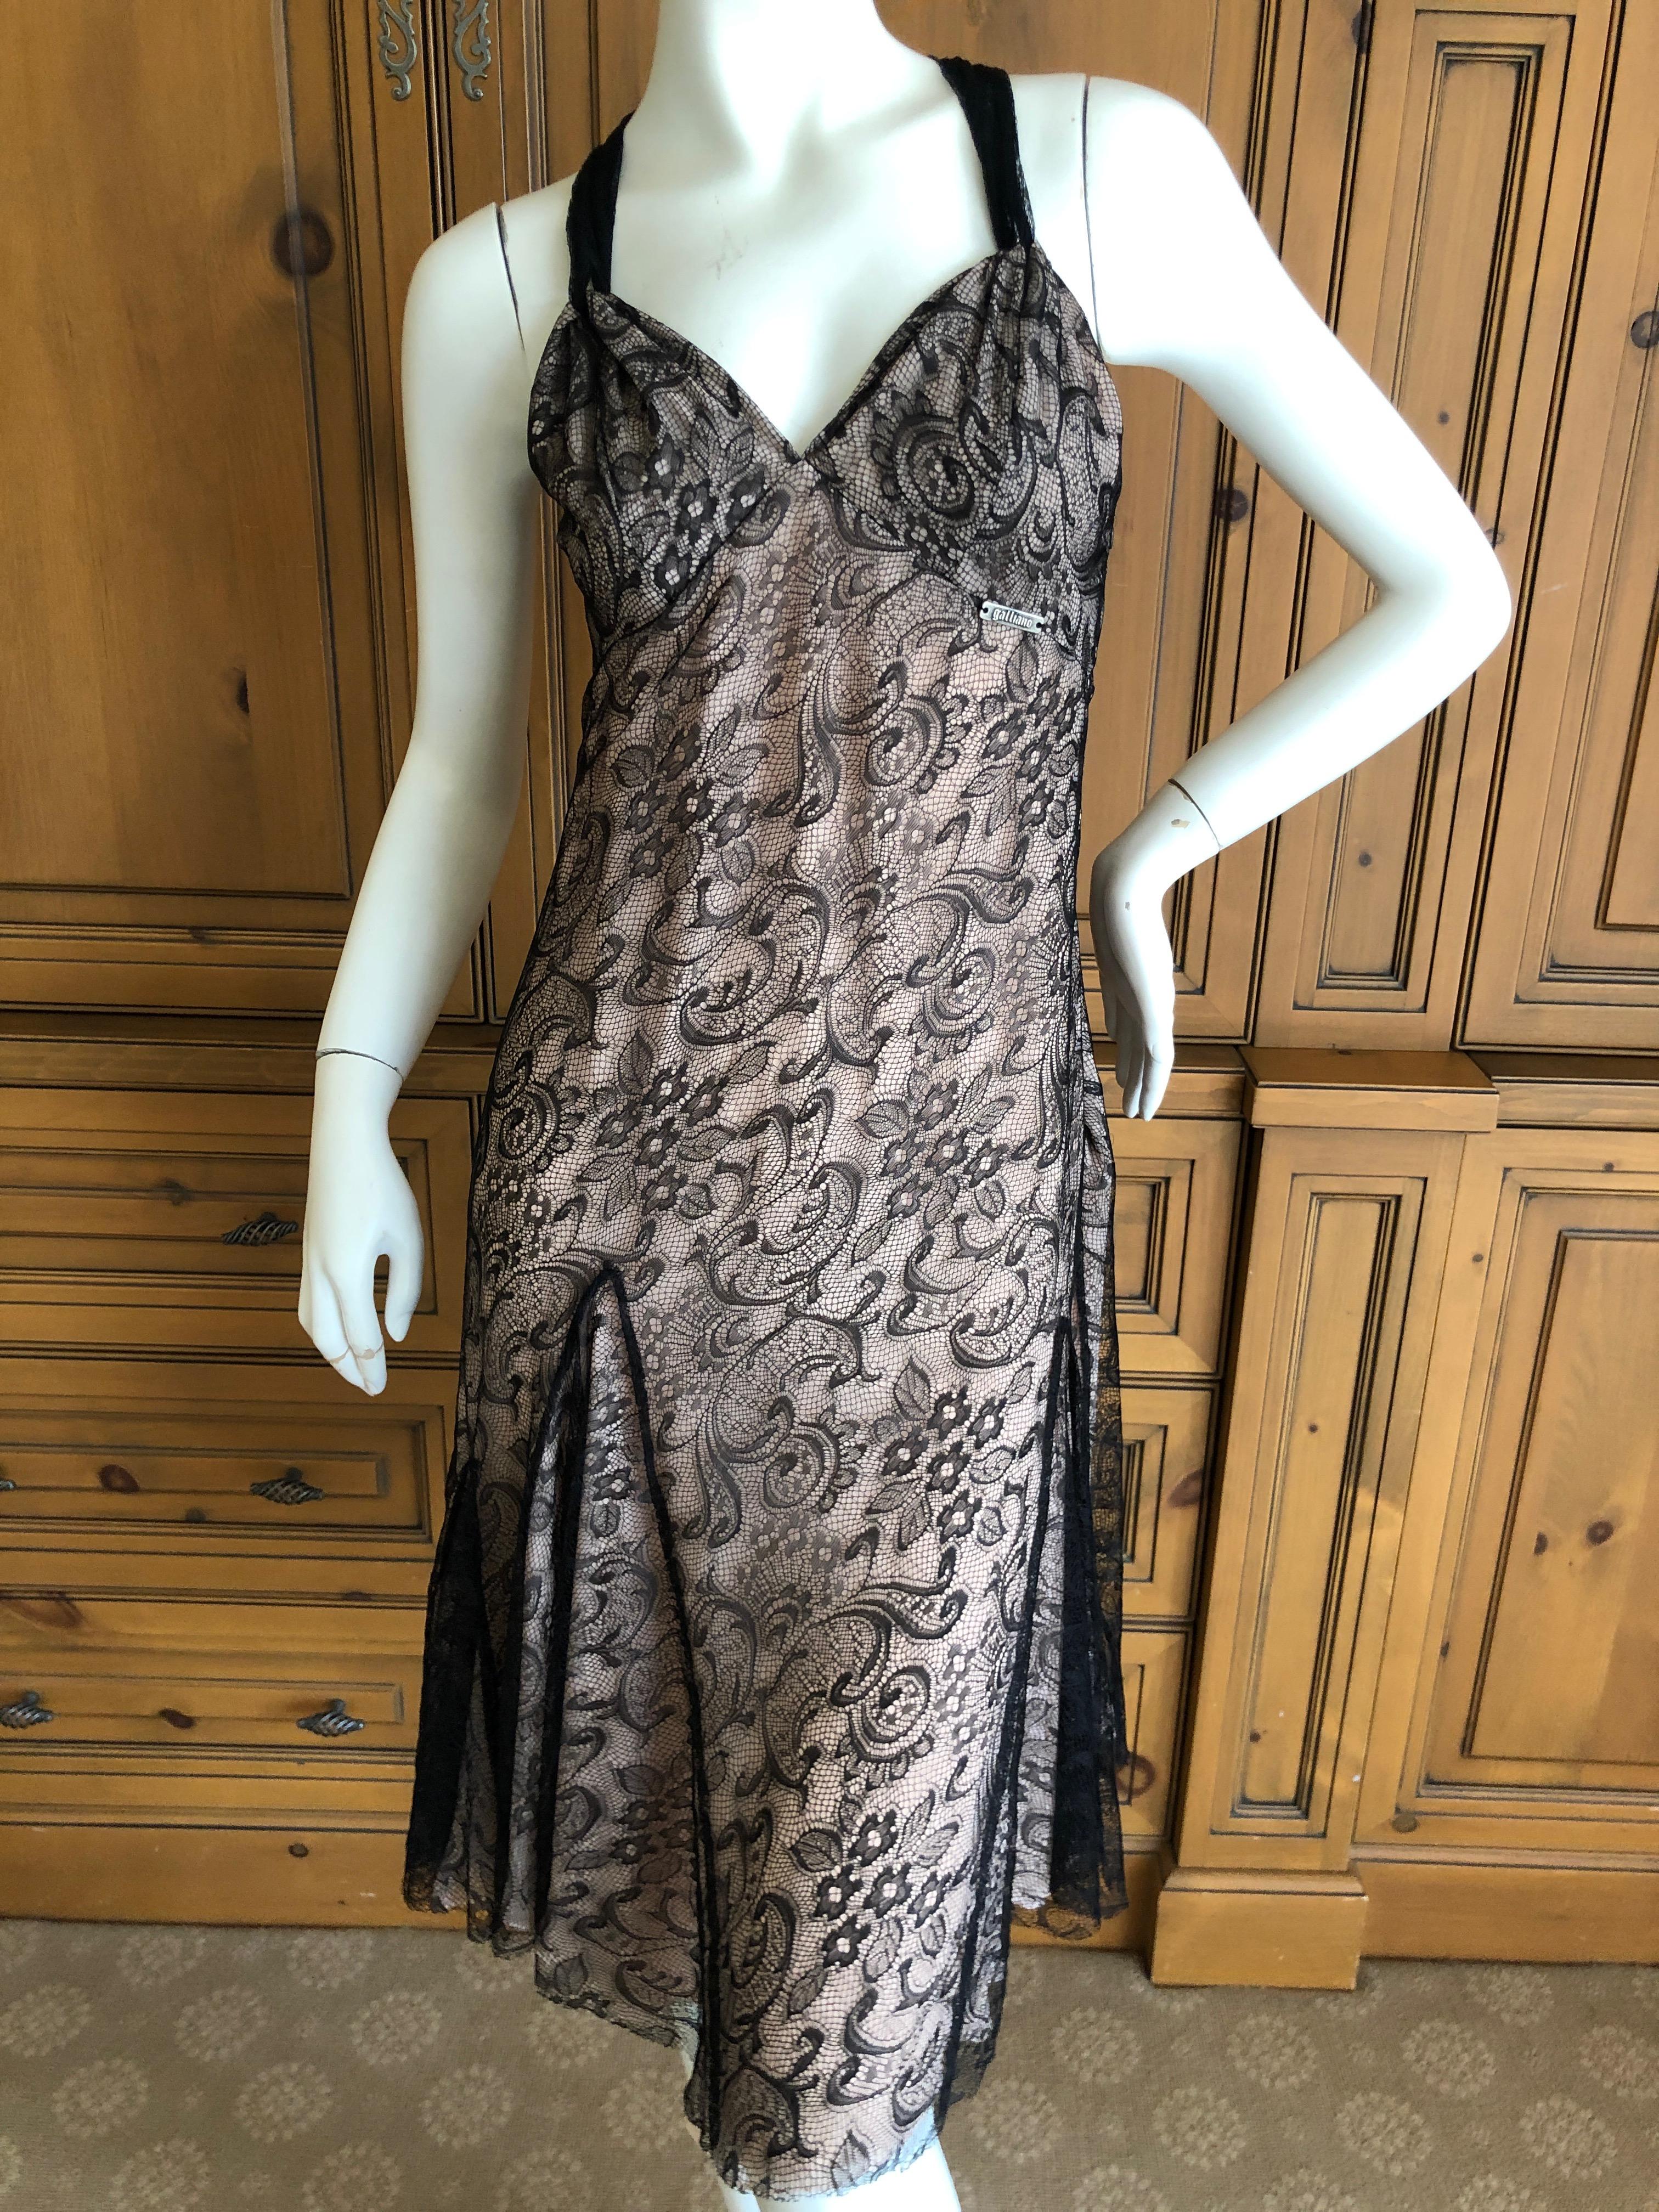 Women's John Galliano Vintage Black Lace Cocktail Dress with Pale Pink Lining For Sale